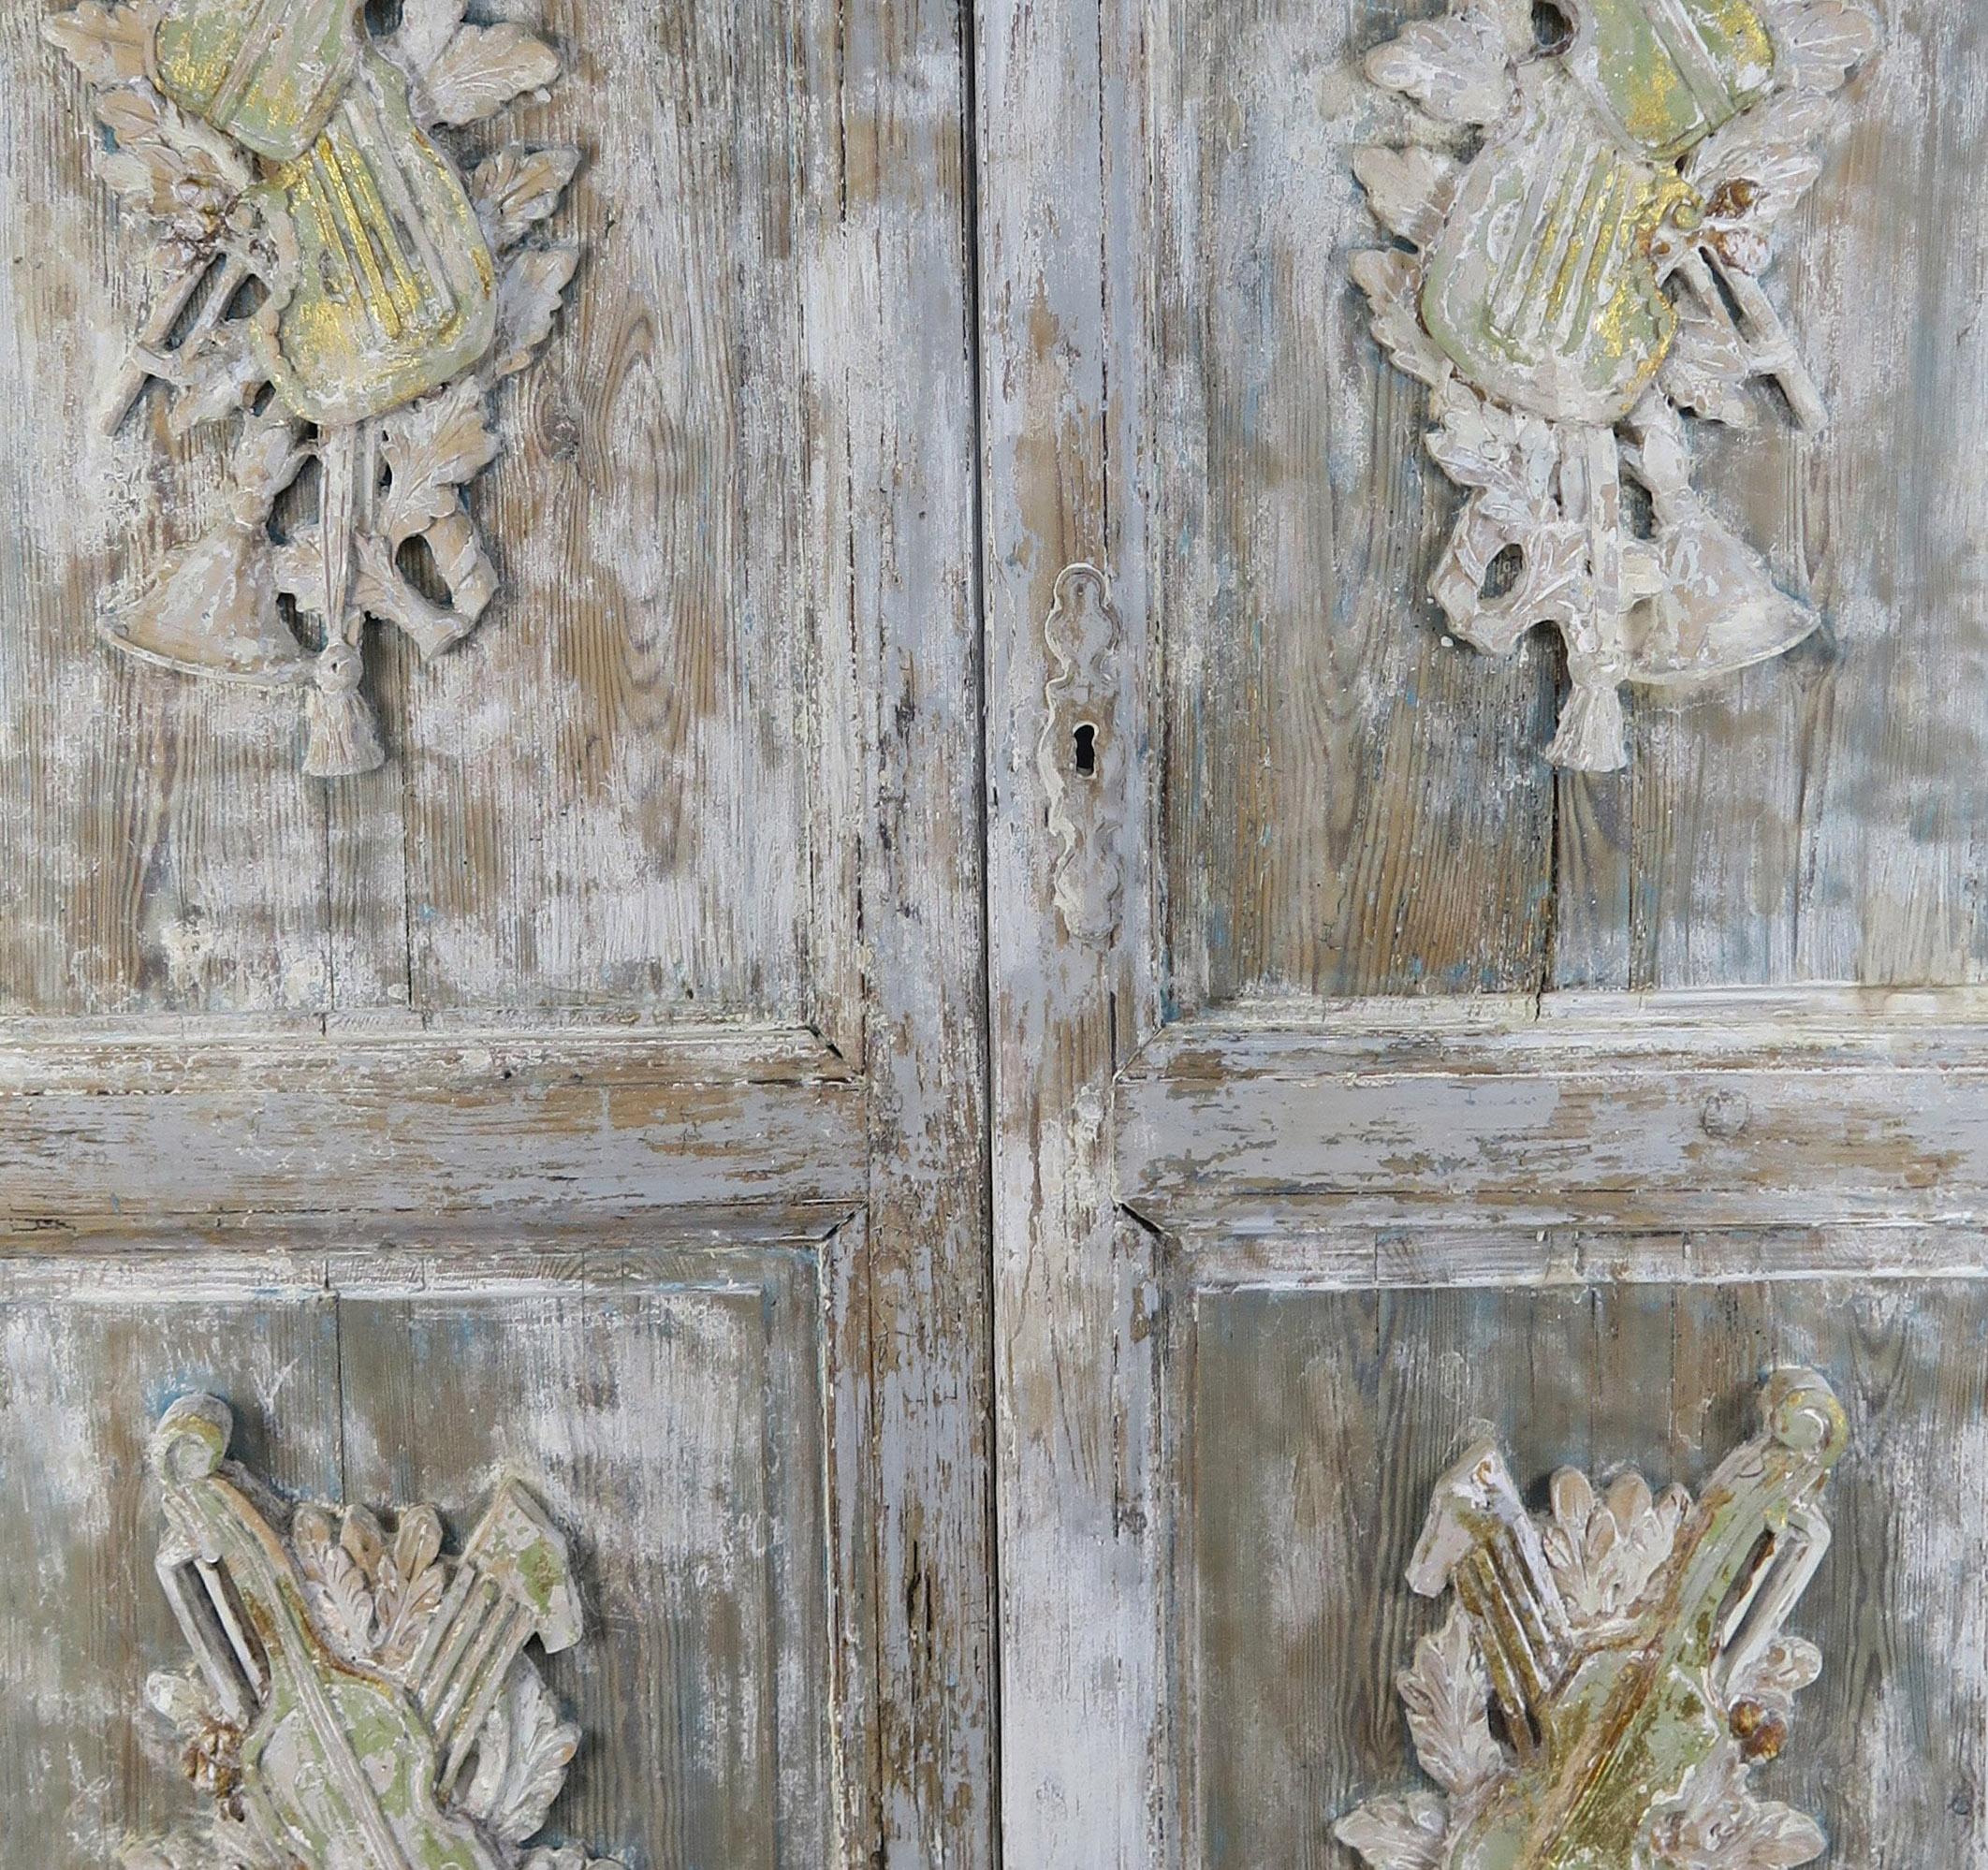 Pair of 19th century French Louis XV style carved painted doors with carvings of musical instruments on all four panels. Beautiful painted distressed finish in soft shades of gray, antique white and gold.